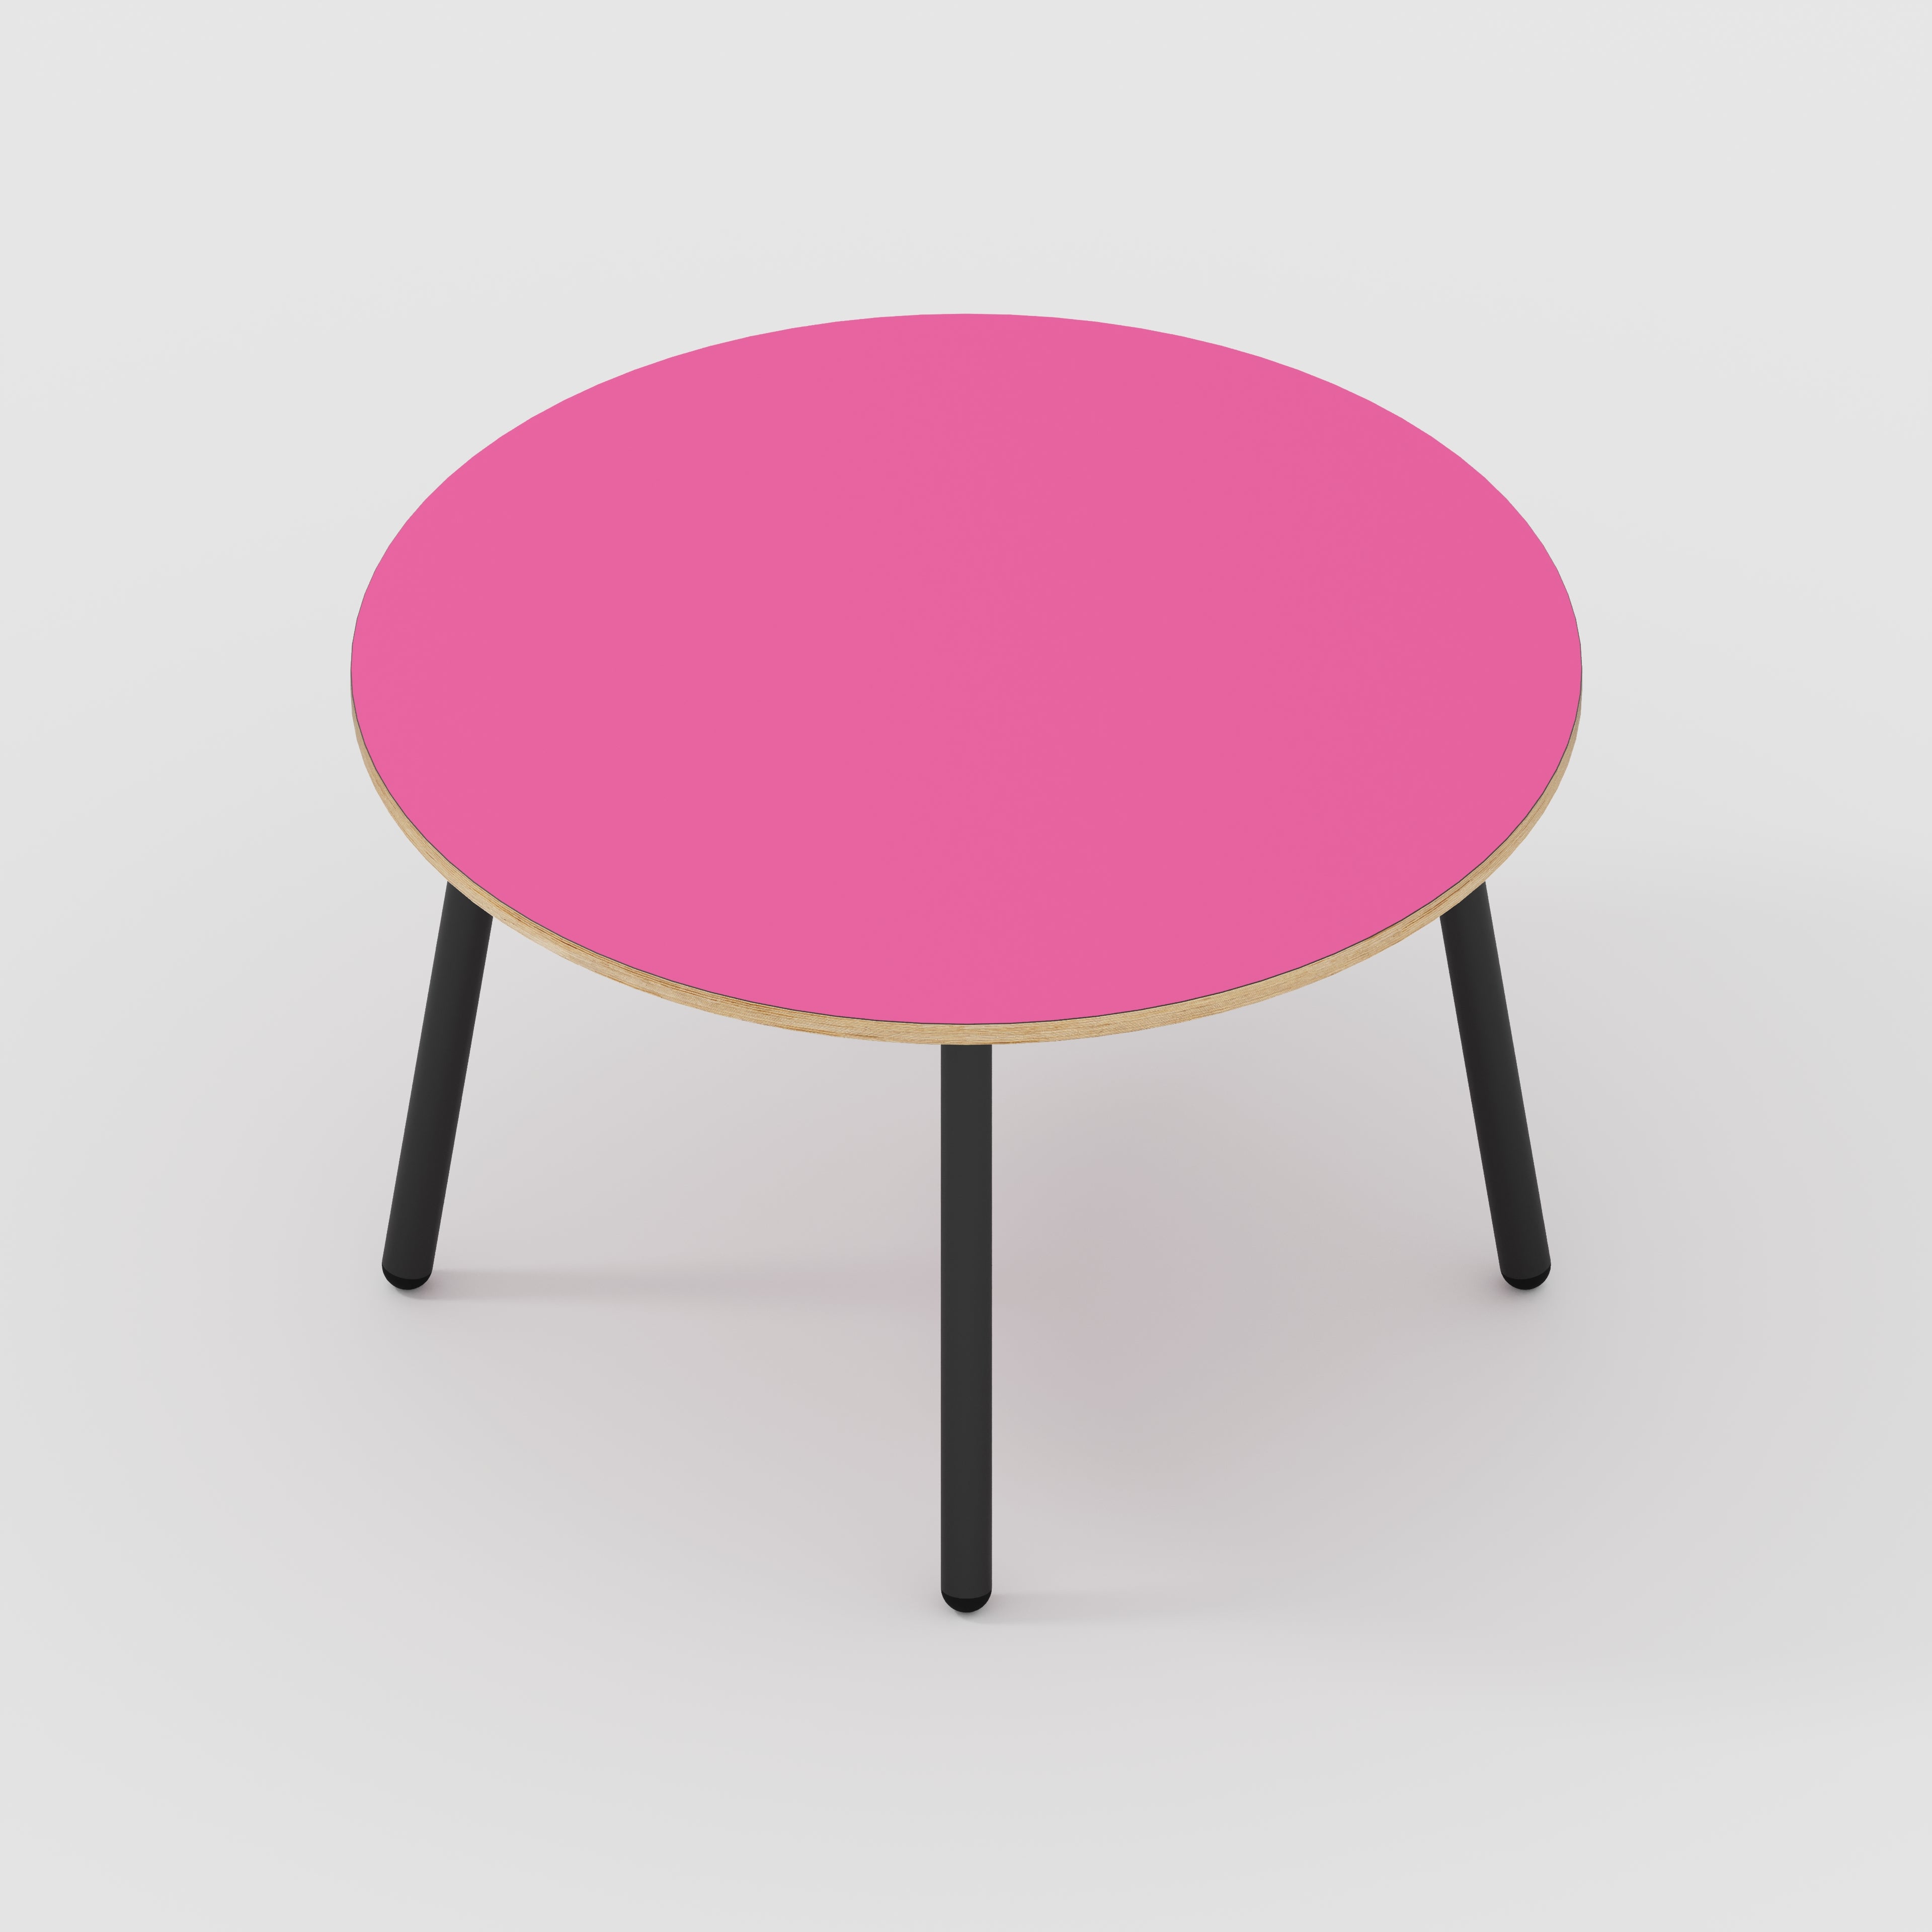 Round Table with Black Round Single Pin Legs - Formica Juicy Pink - 1200(dia) x 735(h)